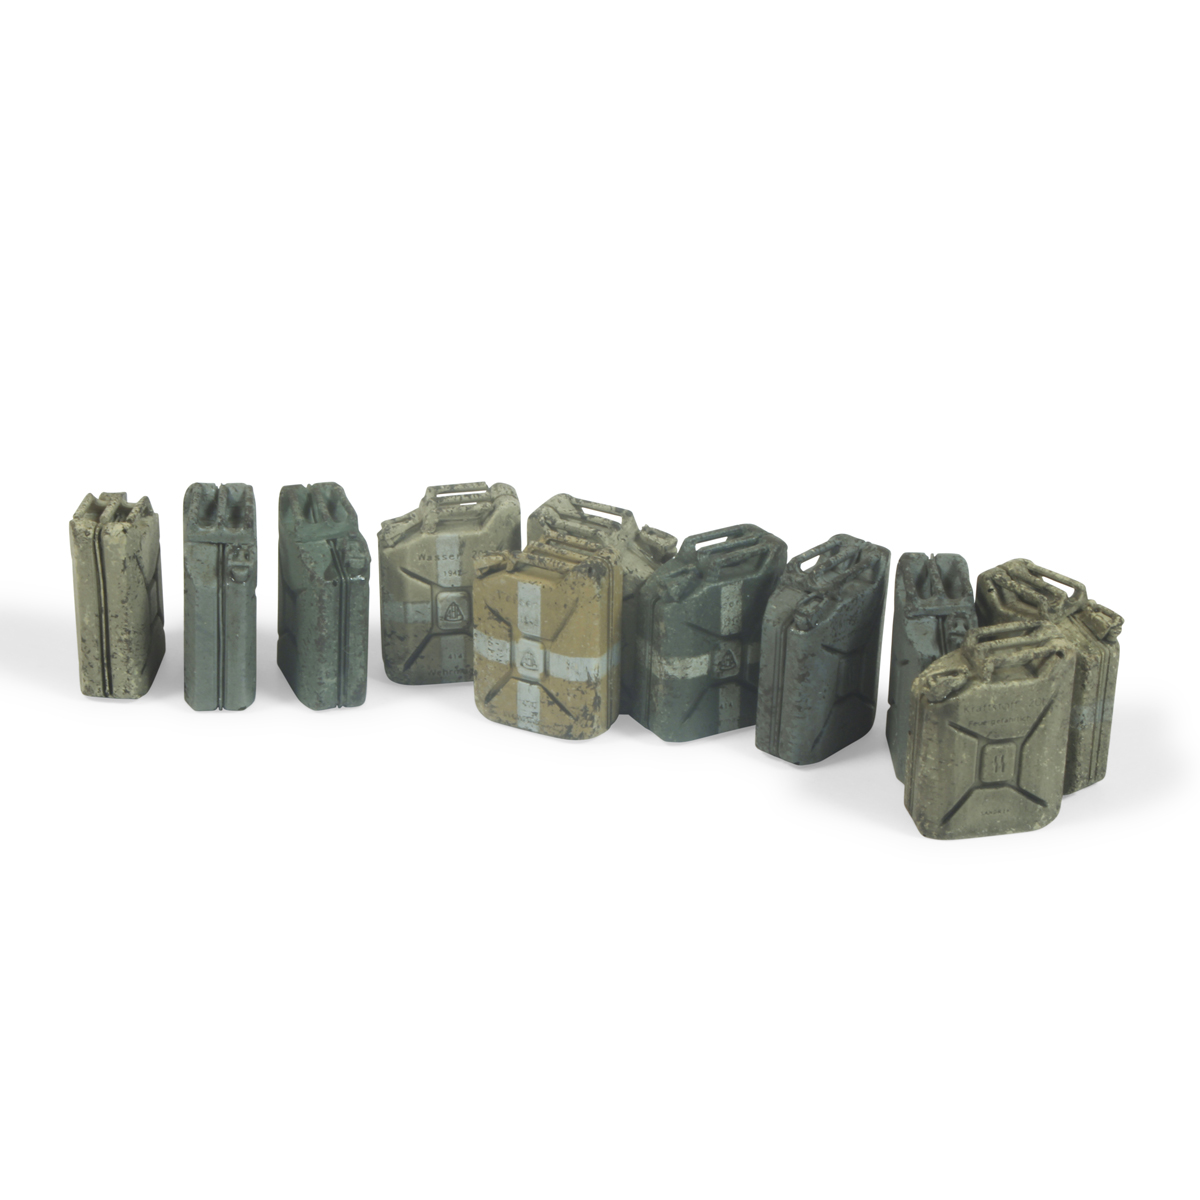 Rcp-35-0094 German Jerry Can Set, Late